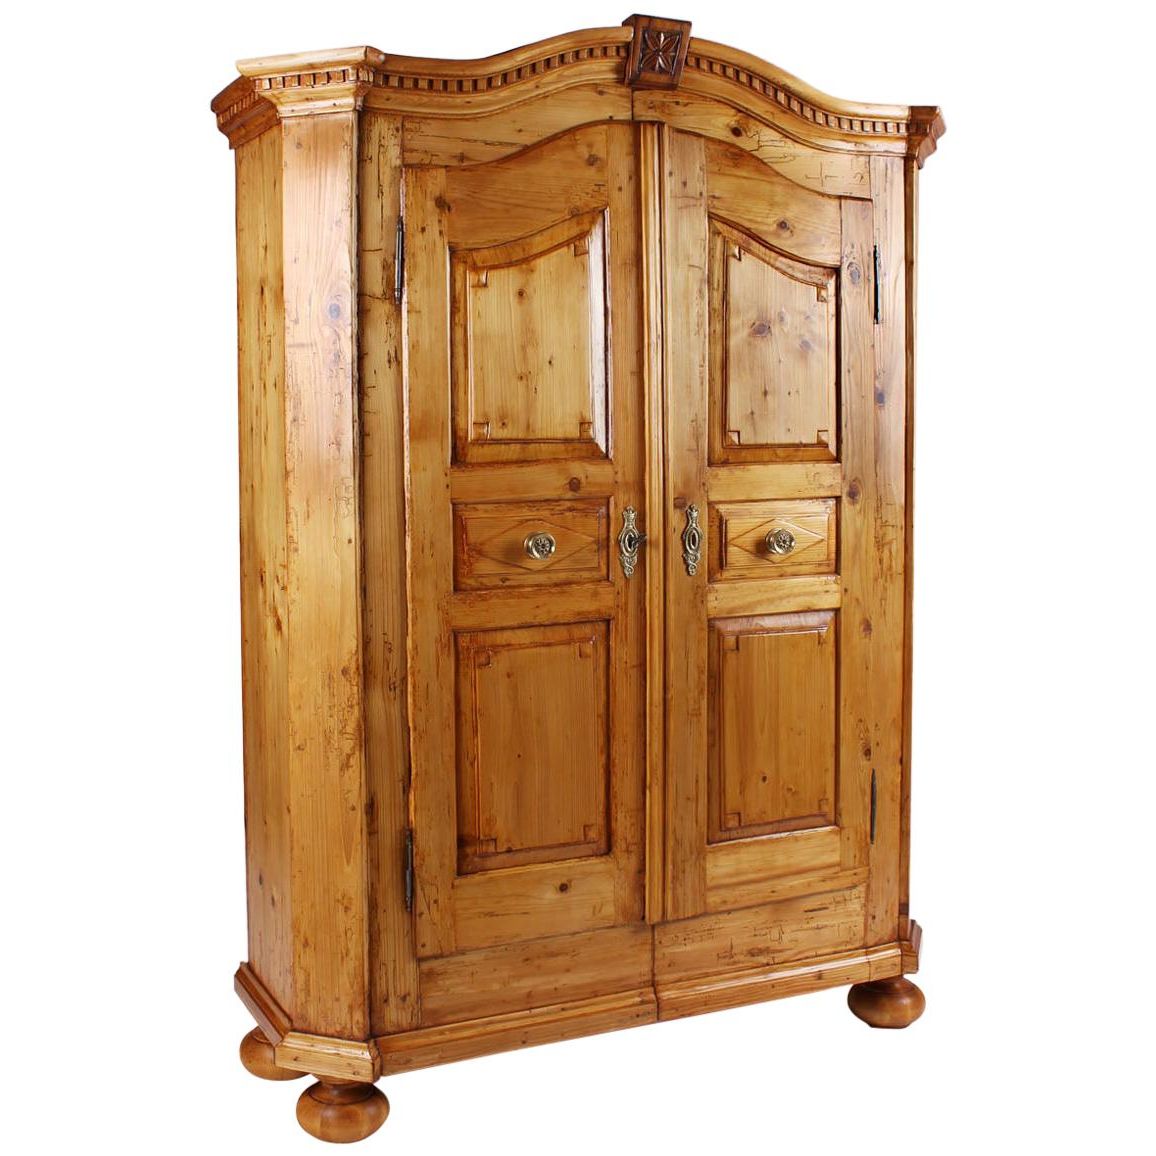 Antique Wardrobe, Light Colored Soft Wood, Southern Germany, Early 19th  Century At 1stdibs | Antique Armoire, Ornate Wardrobe, Antique Wooden  Wardrobe Intended For White Antique Wardrobes (View 17 of 20)